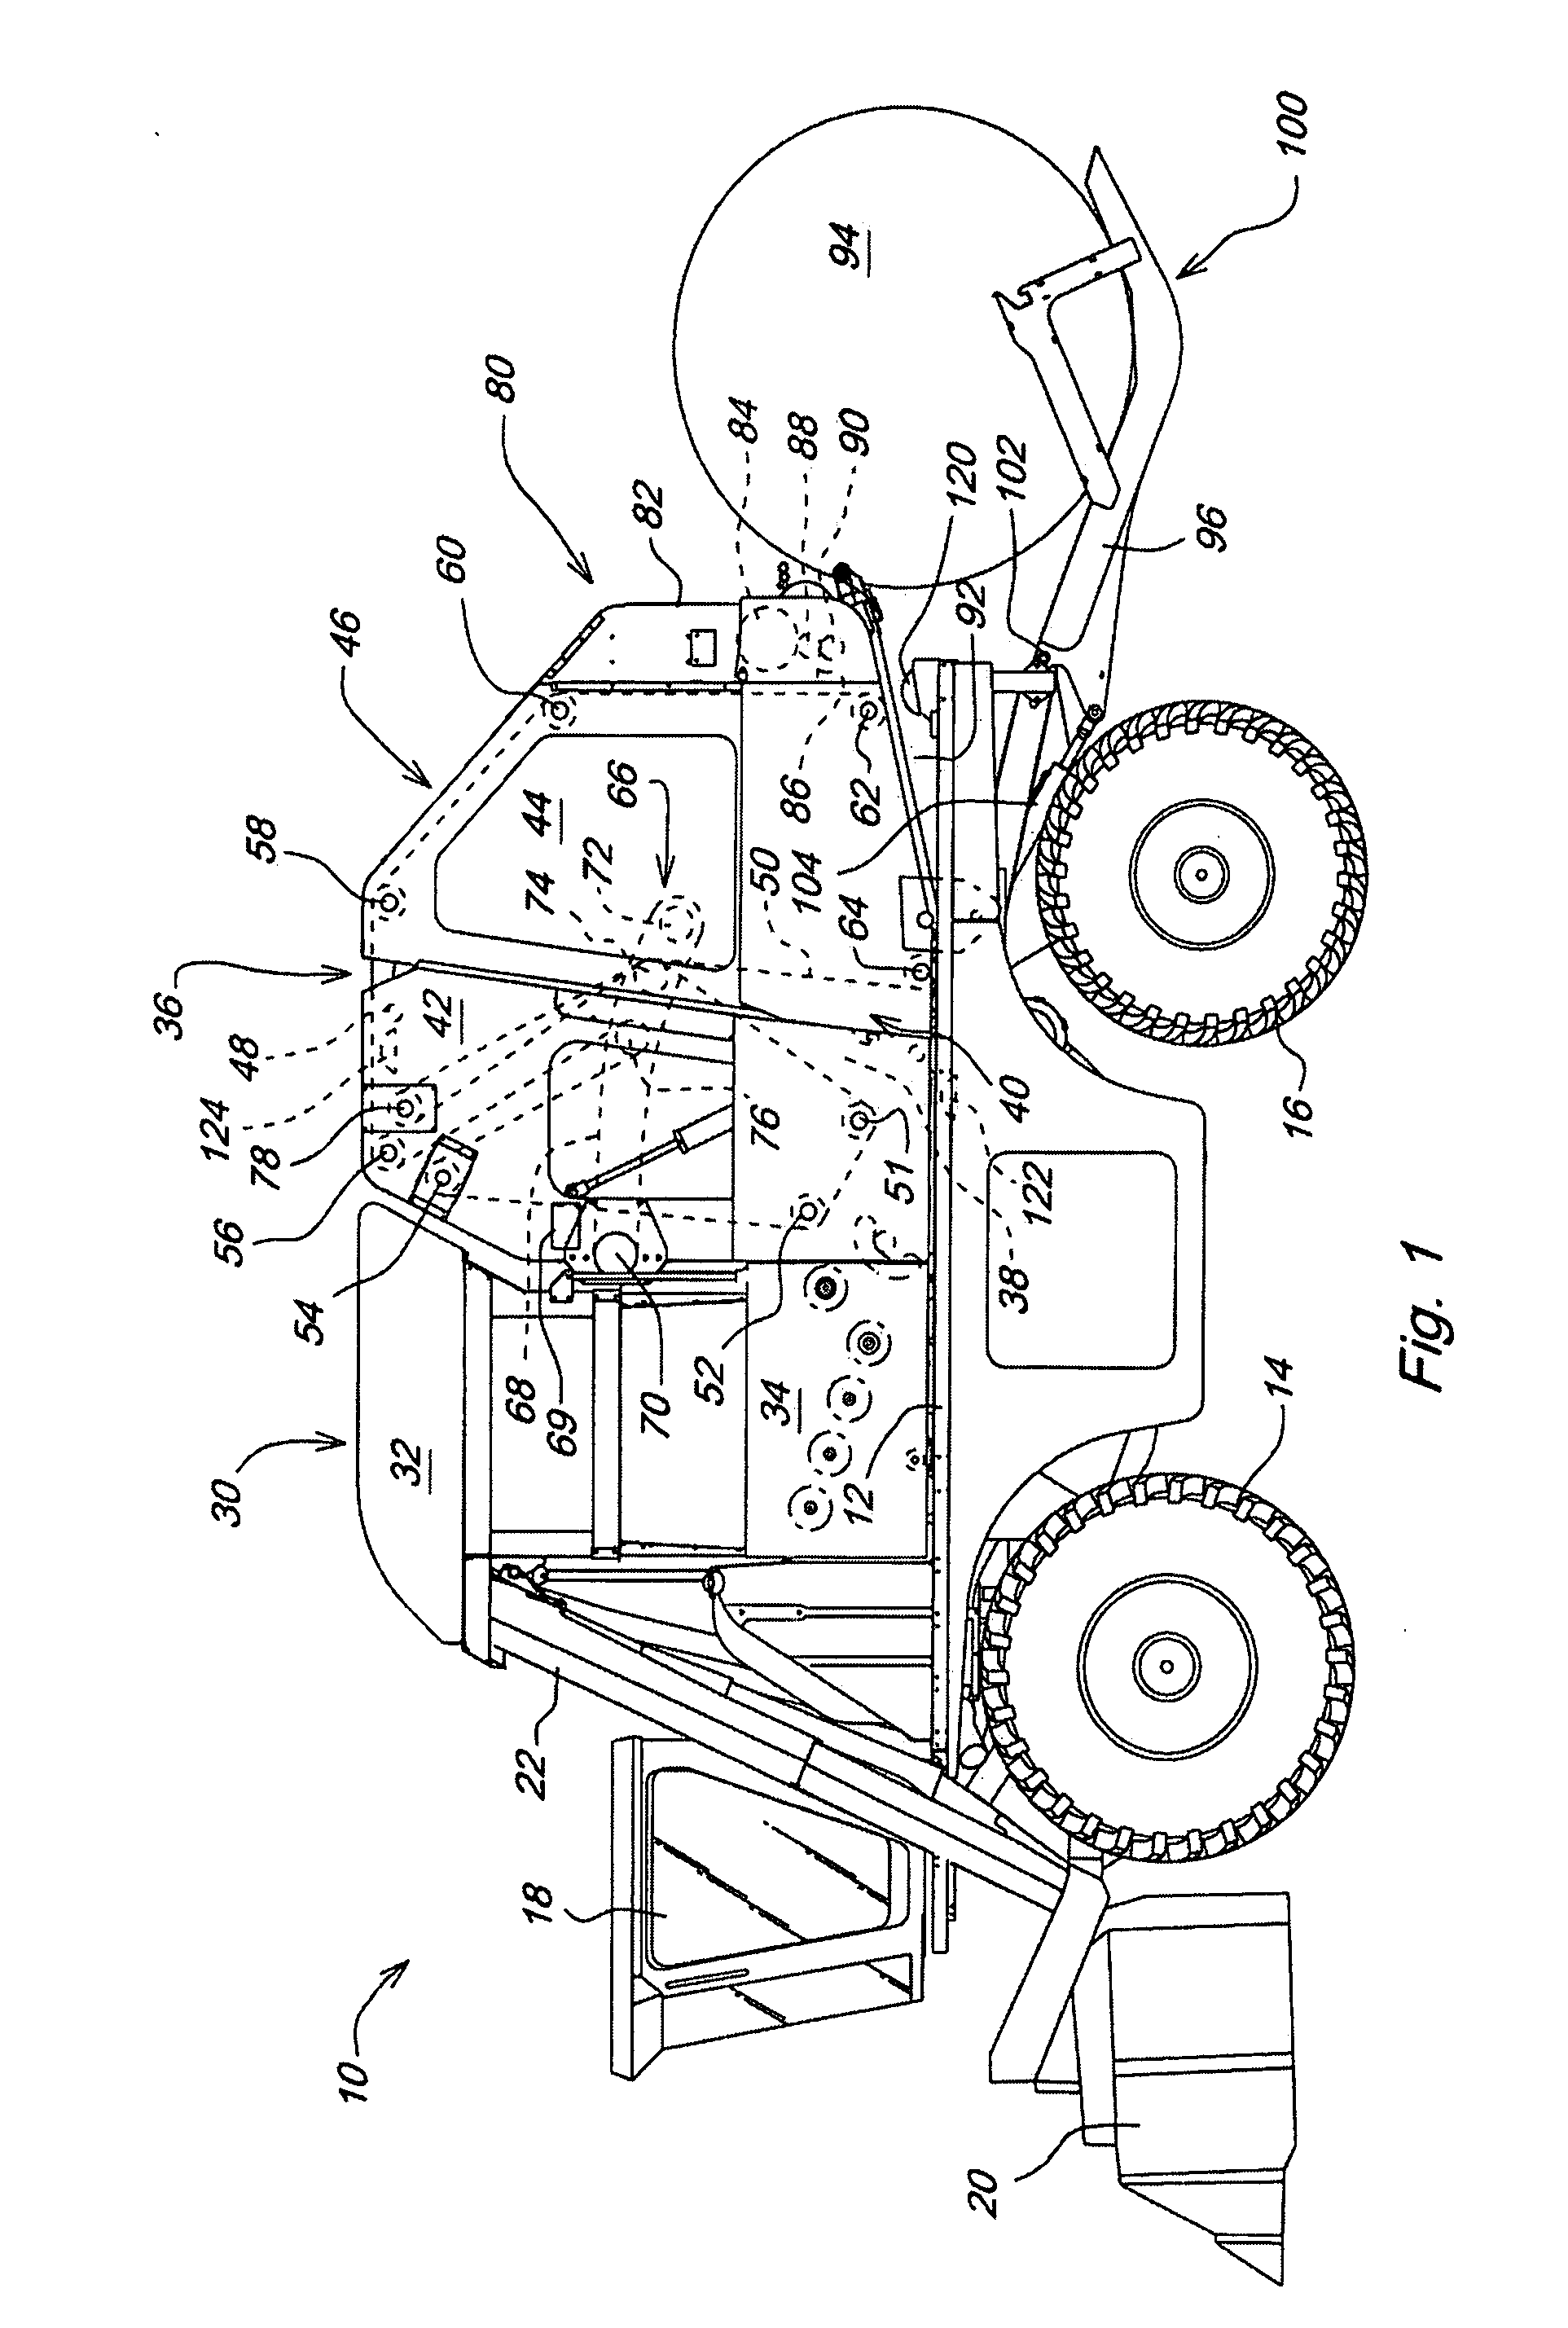 Cotton Harvester For Producing Modules Which Can Be Automatically Identified And Oriented